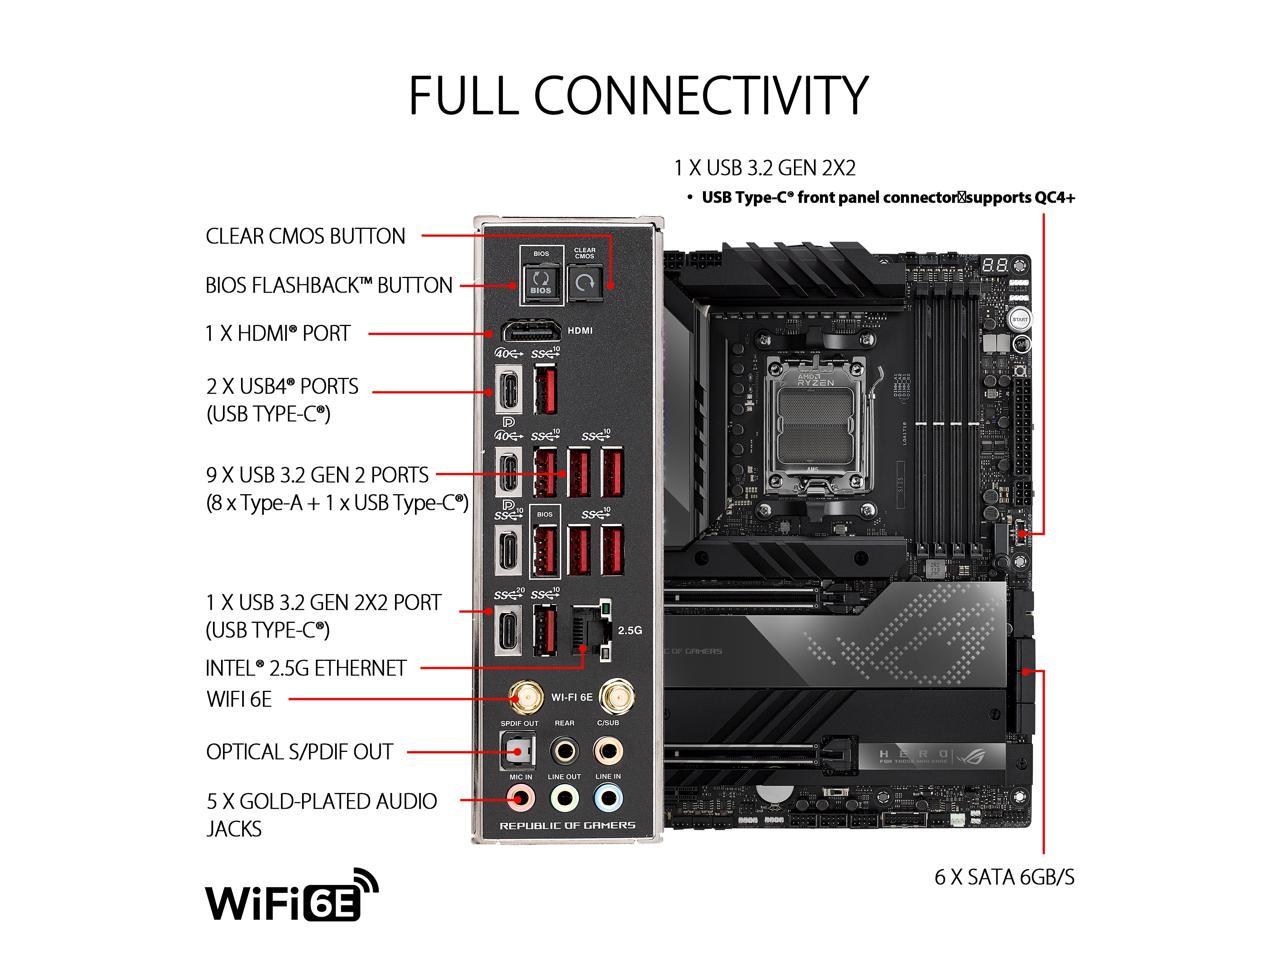 ASUS ROG CROSSHAIR X670E HERO (WiFi 6E) Socket AM5 (LGA 1718) Ryzen 7000 gaming motherboard (18 + 2 power stages, PCIe 5.0, DDR5 support, five M.2 slots, USB 3.2 Gen 2x2 front-panel connector with Quick Charge 4+, USB4, Wi-Fi 6E)